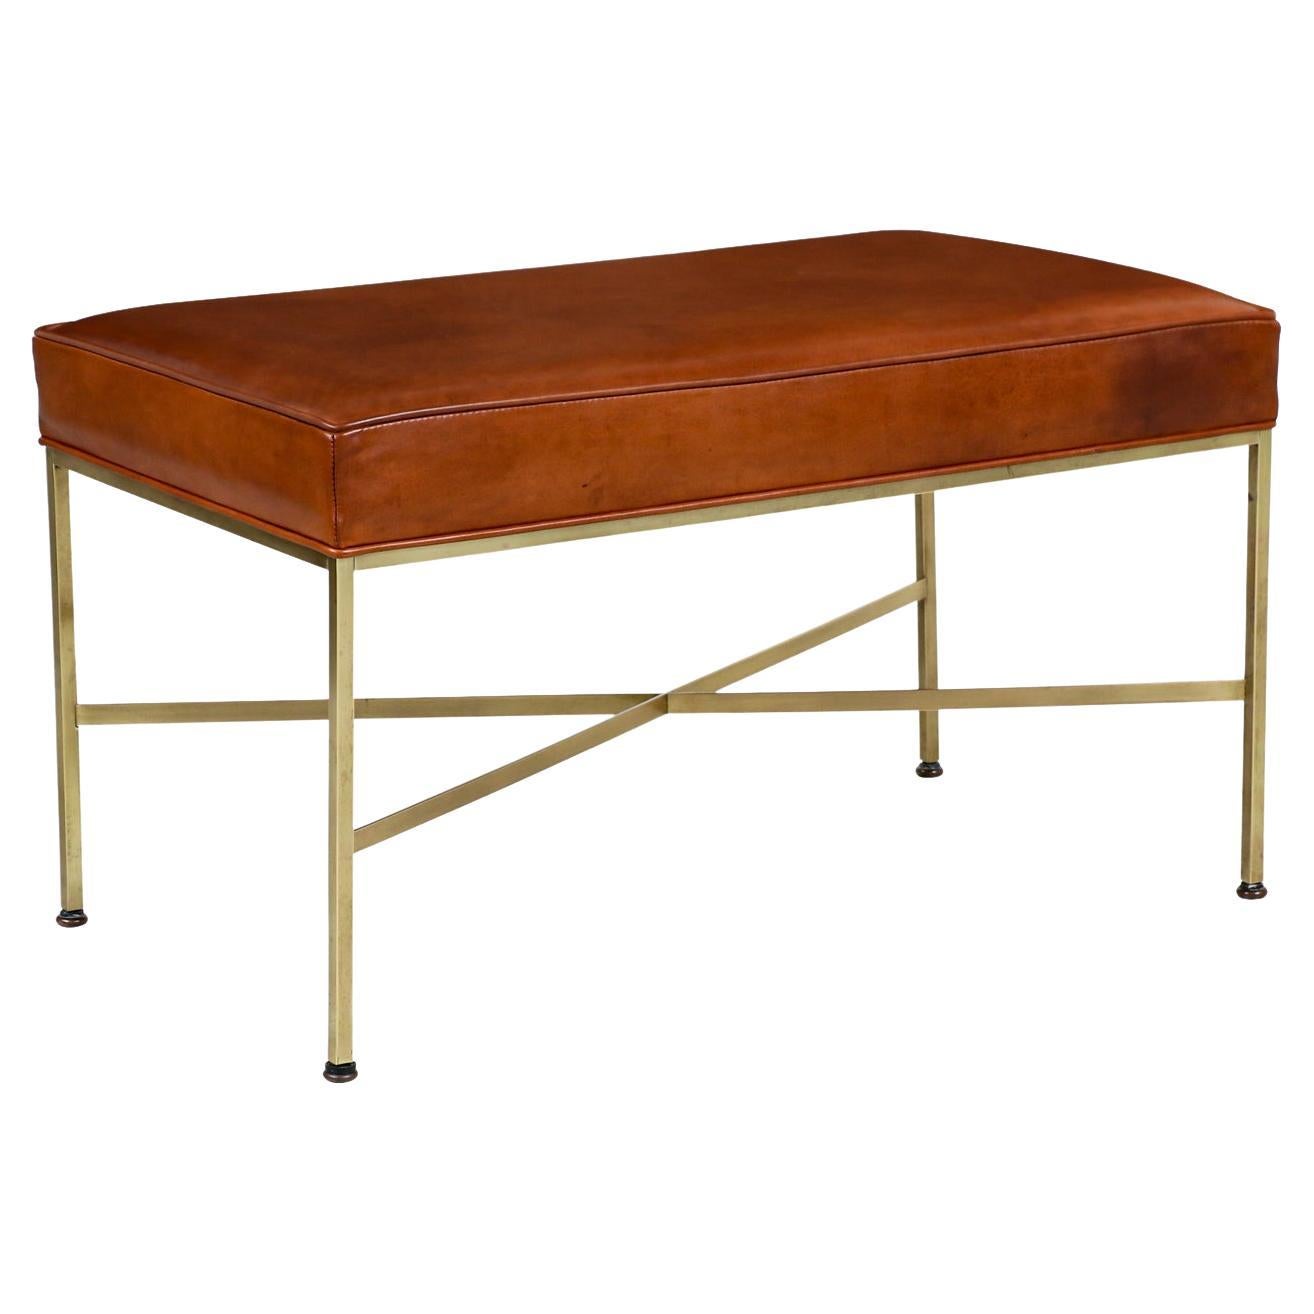 Expertly Restored - Paul McCobb “Irwin Collection” Cognac Leather Bench